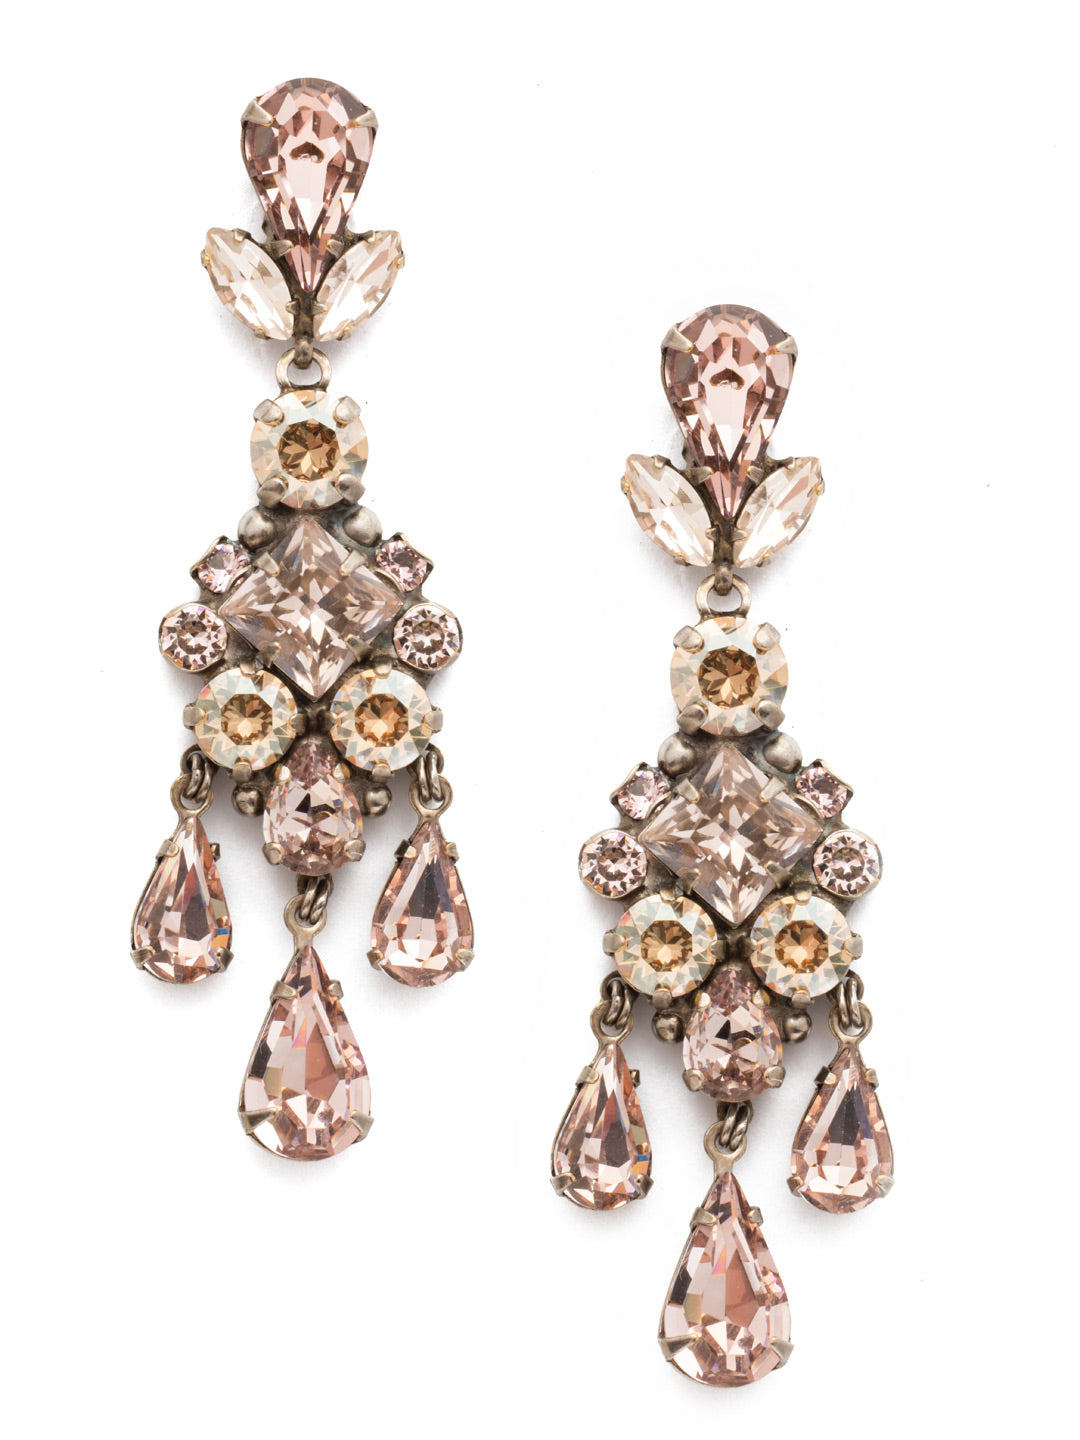 Whitley Post Earrings - EDZ39ASSBL - A classic Sorrelli style to make a statement or wear everyday. From Sorrelli's Satin Blush collection in our Antique Silver-tone finish.